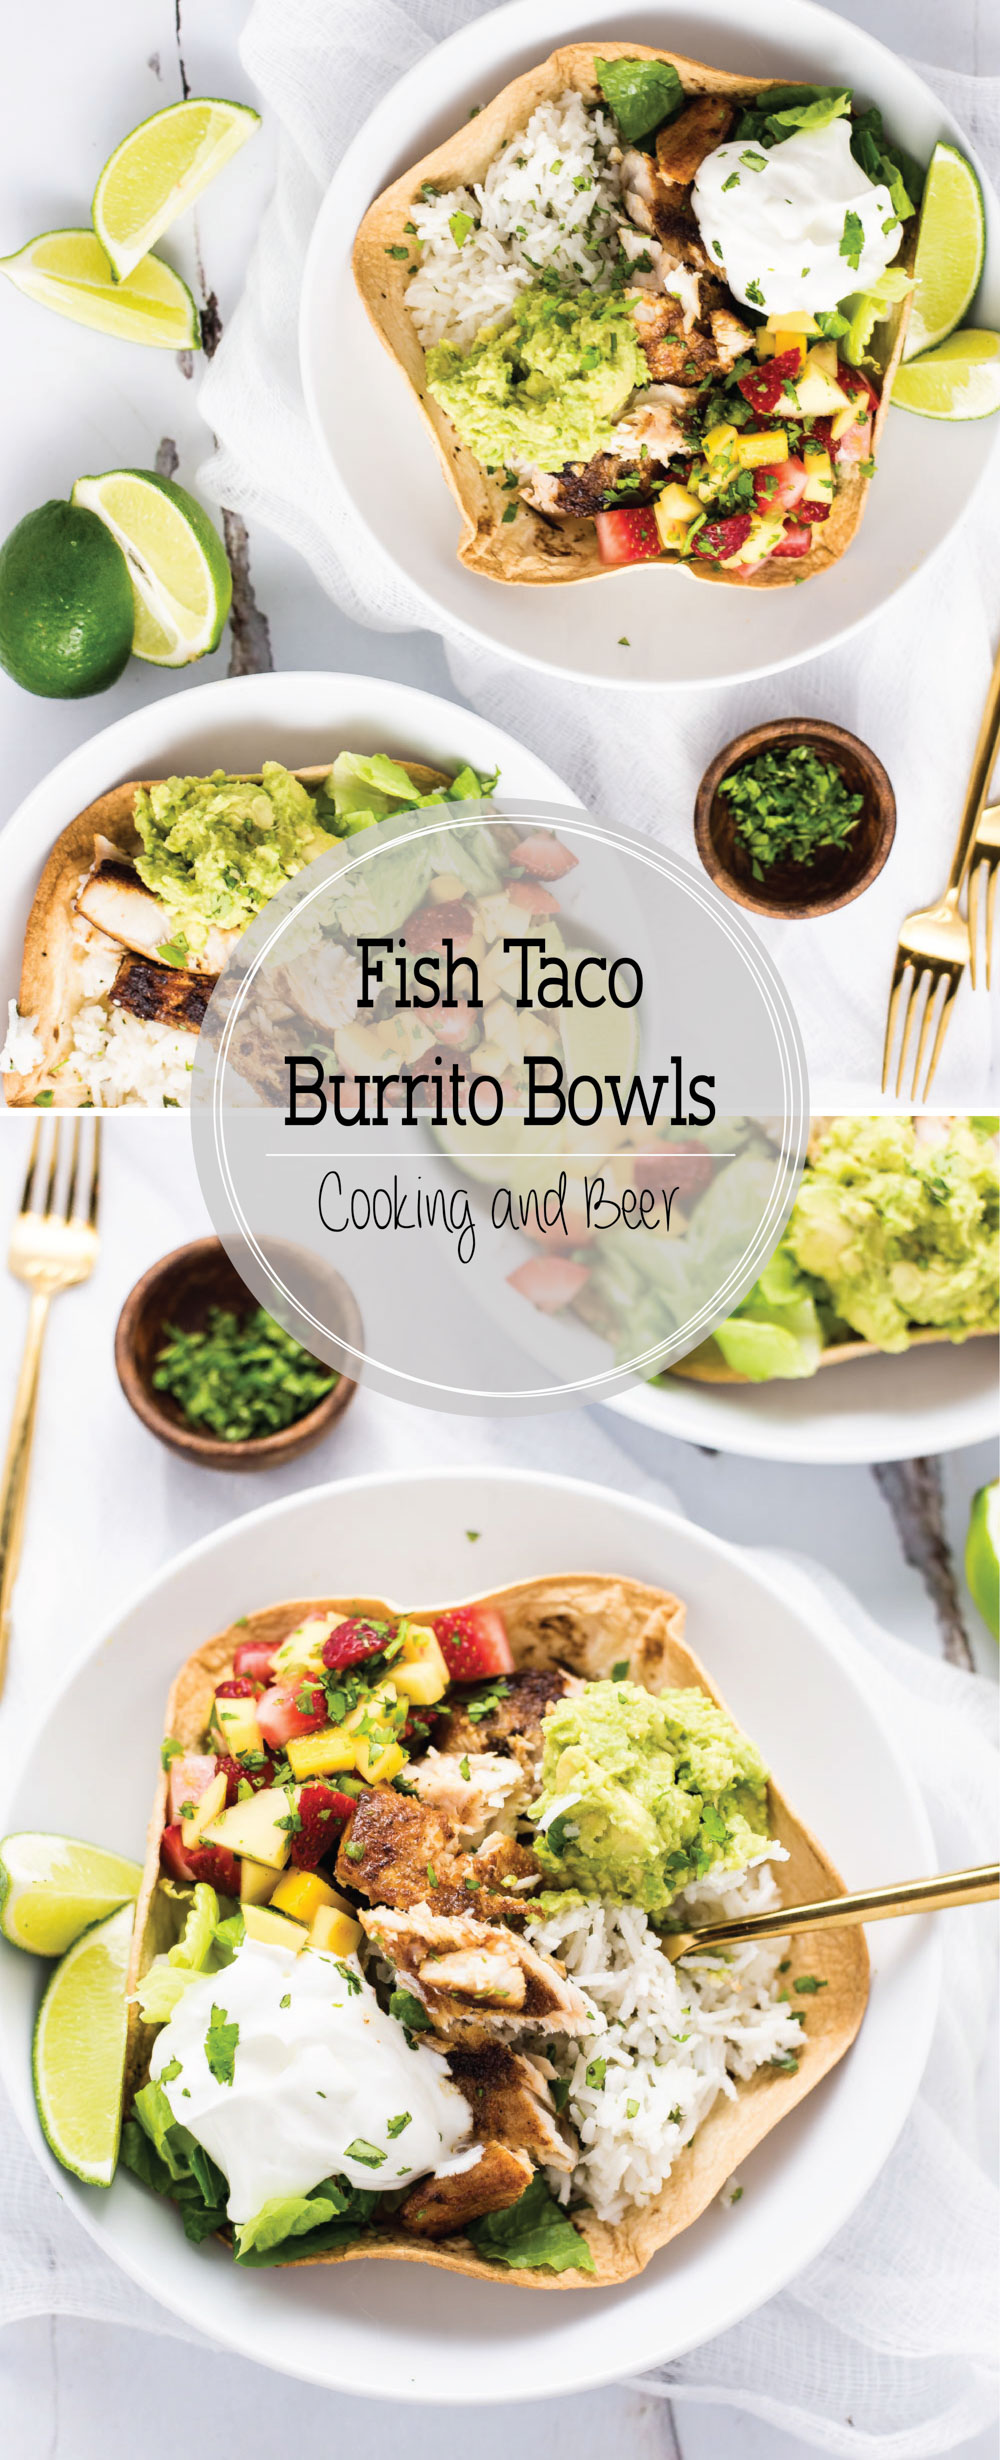 Grilled Fish Taco Burrito Bowls are the perfect weeknight meal. They are a fun twist on Taco Tuesday!